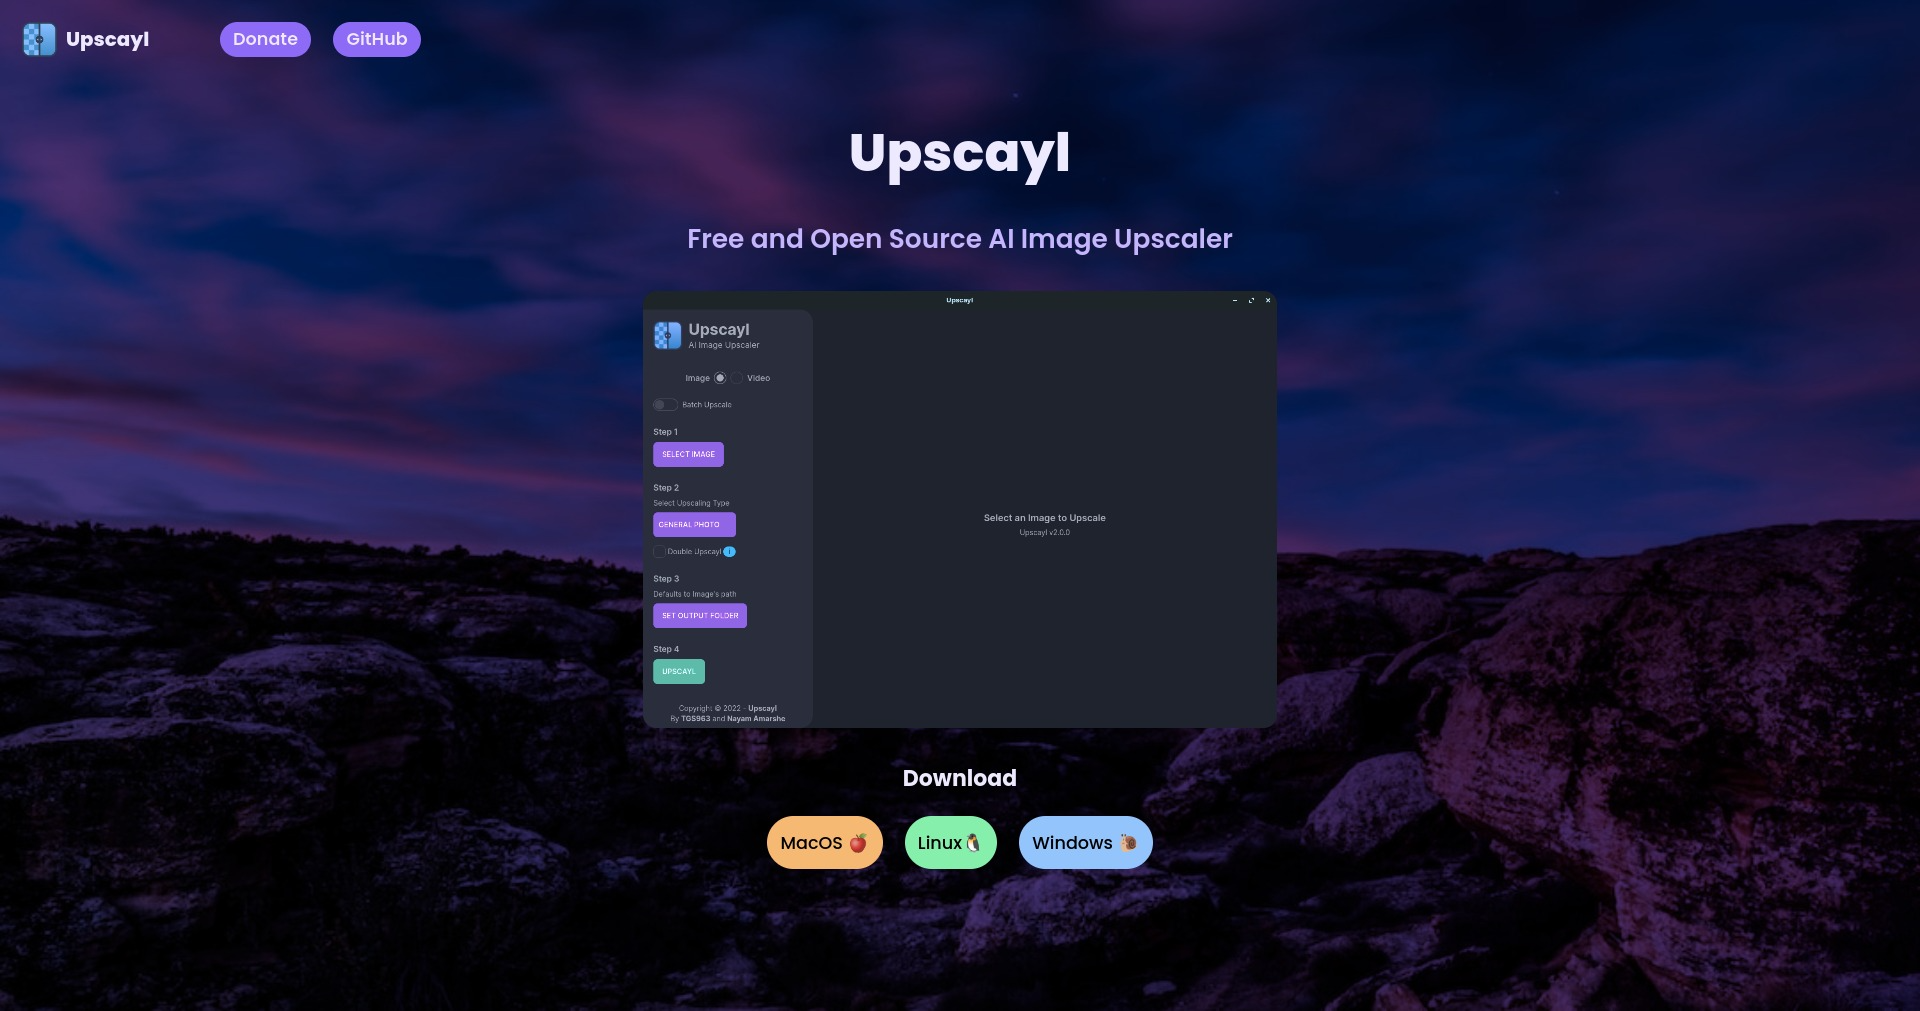 Upscayl - A open-source image upscaler for MacOS, Linux, and Windows